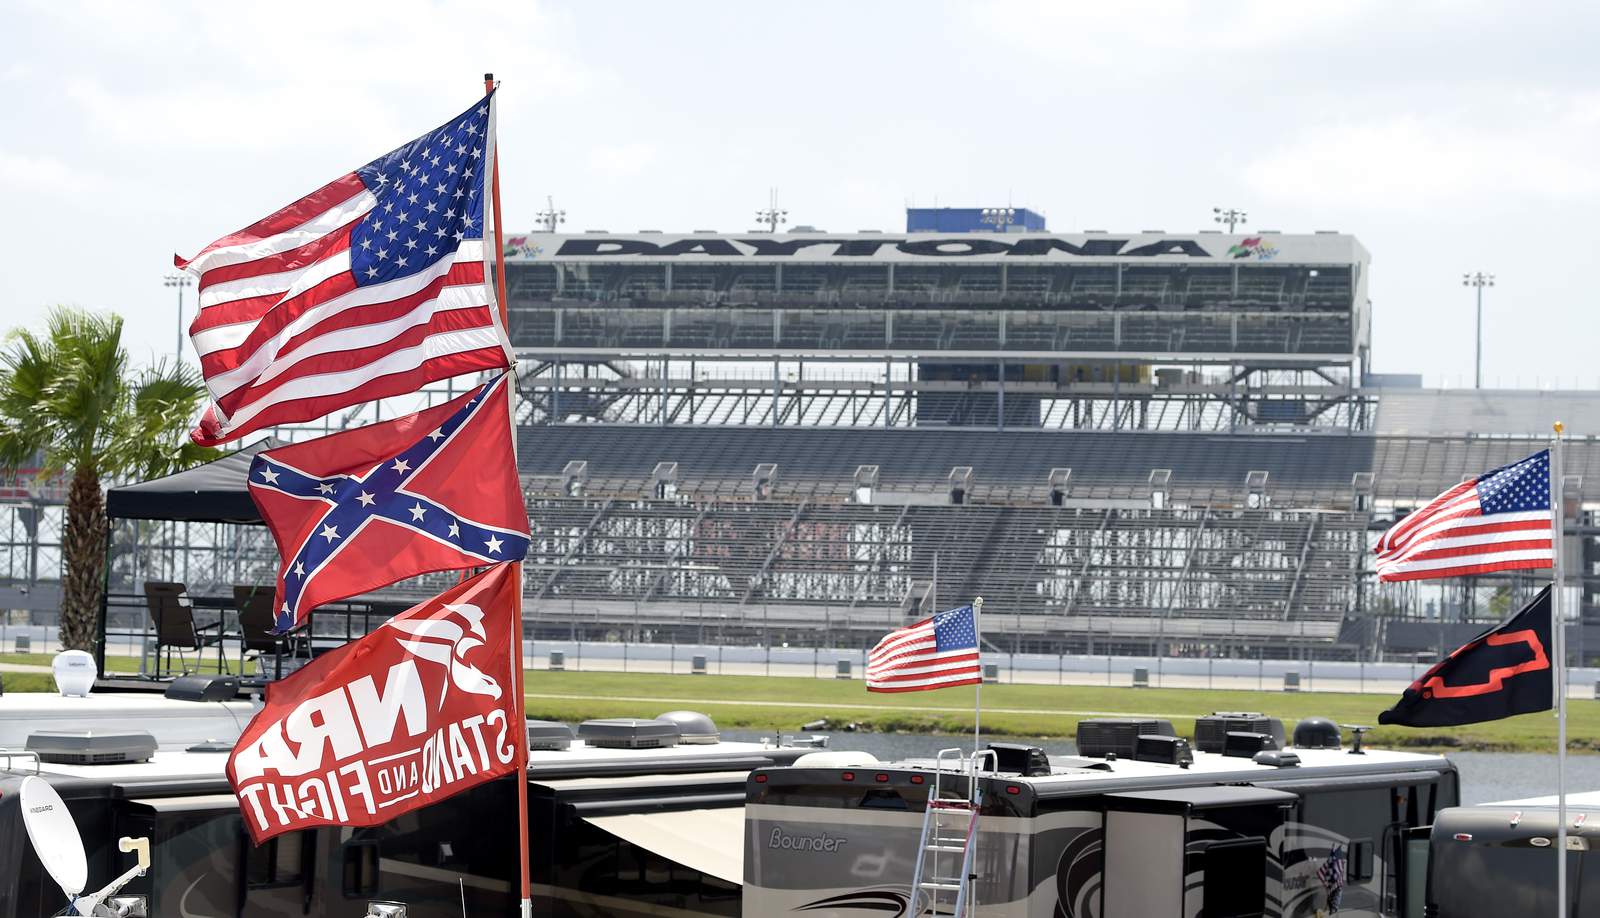 ‘Get rid of all Confederate flags:’ NASCAR could see end of an era